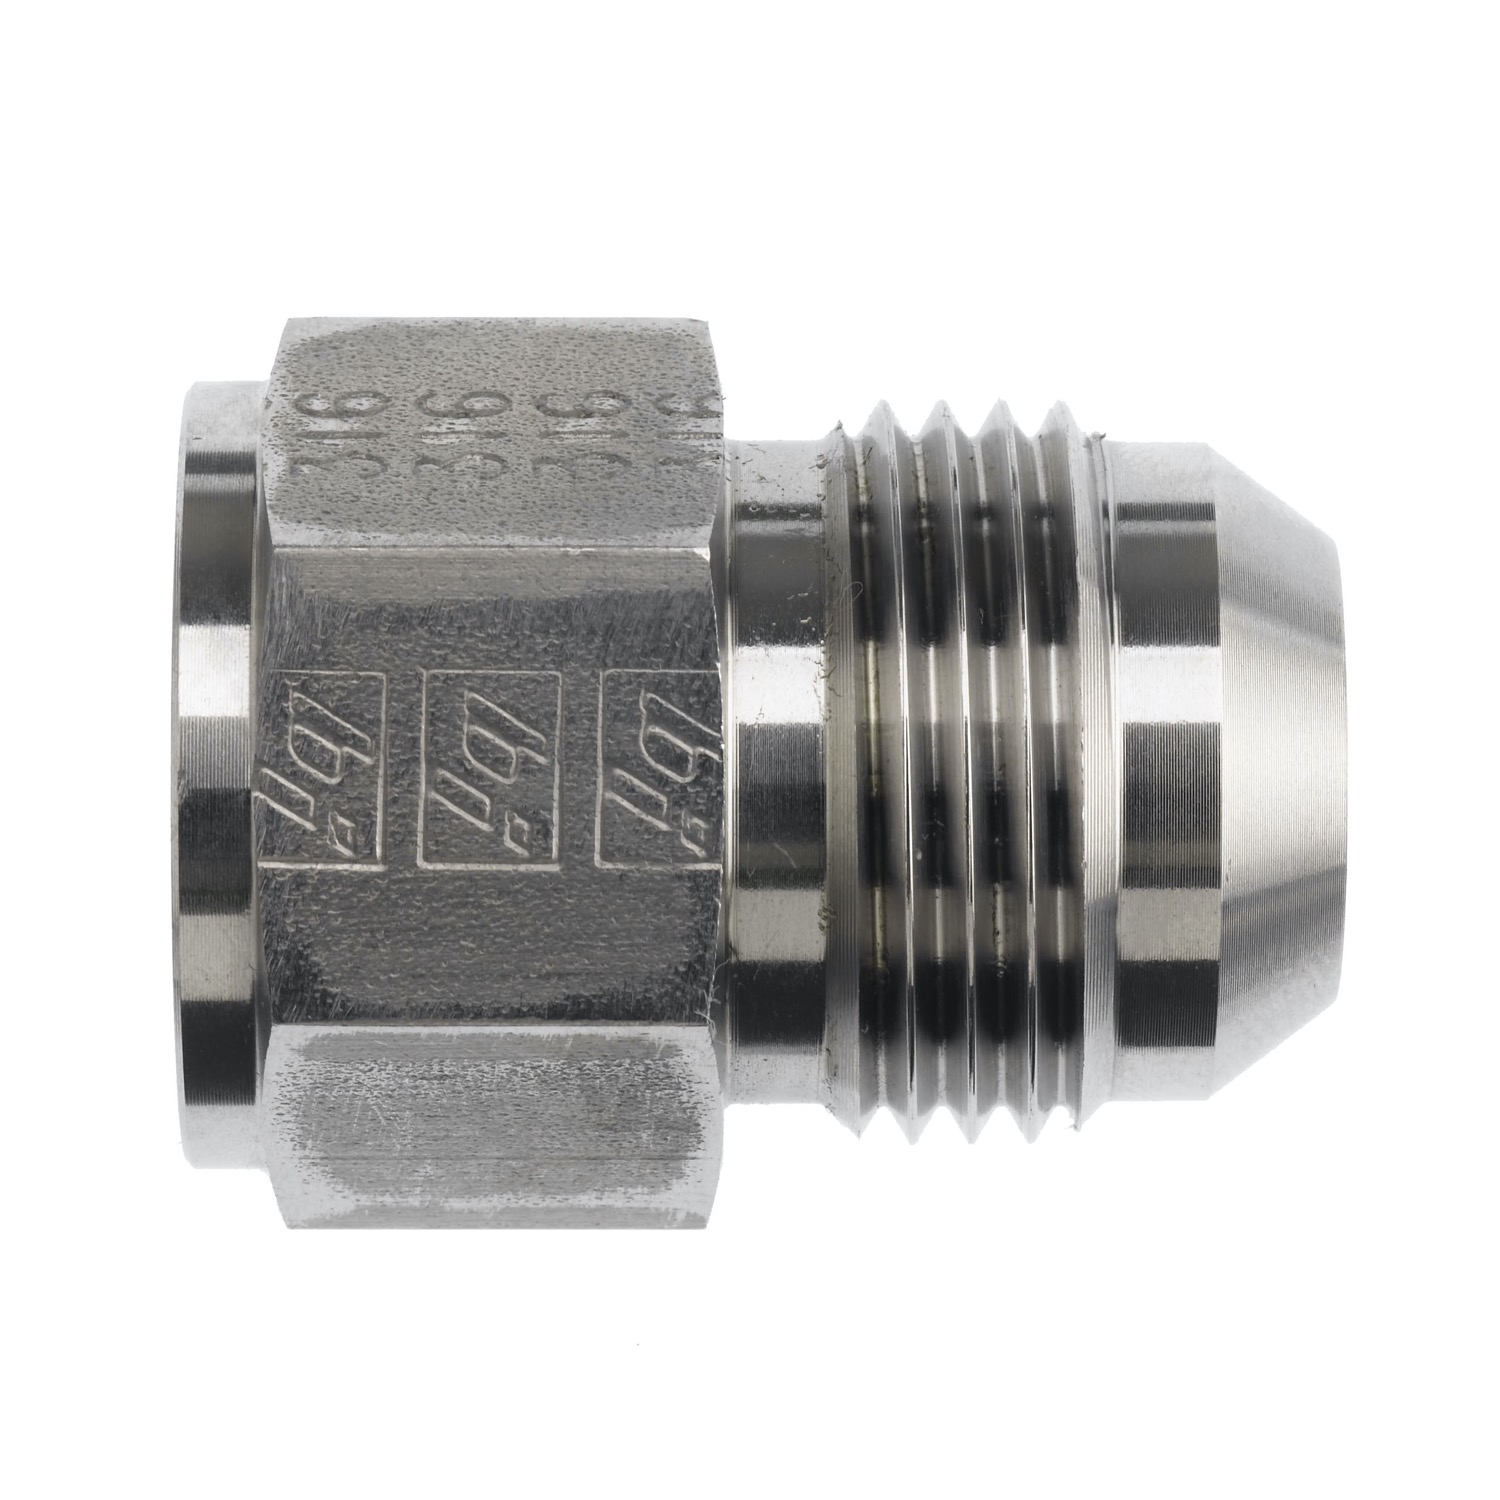 Hydraulic Hose Adapters - Straight Reducer Fitting, JIC 37° Flare, 2406 Series 2406-16-10